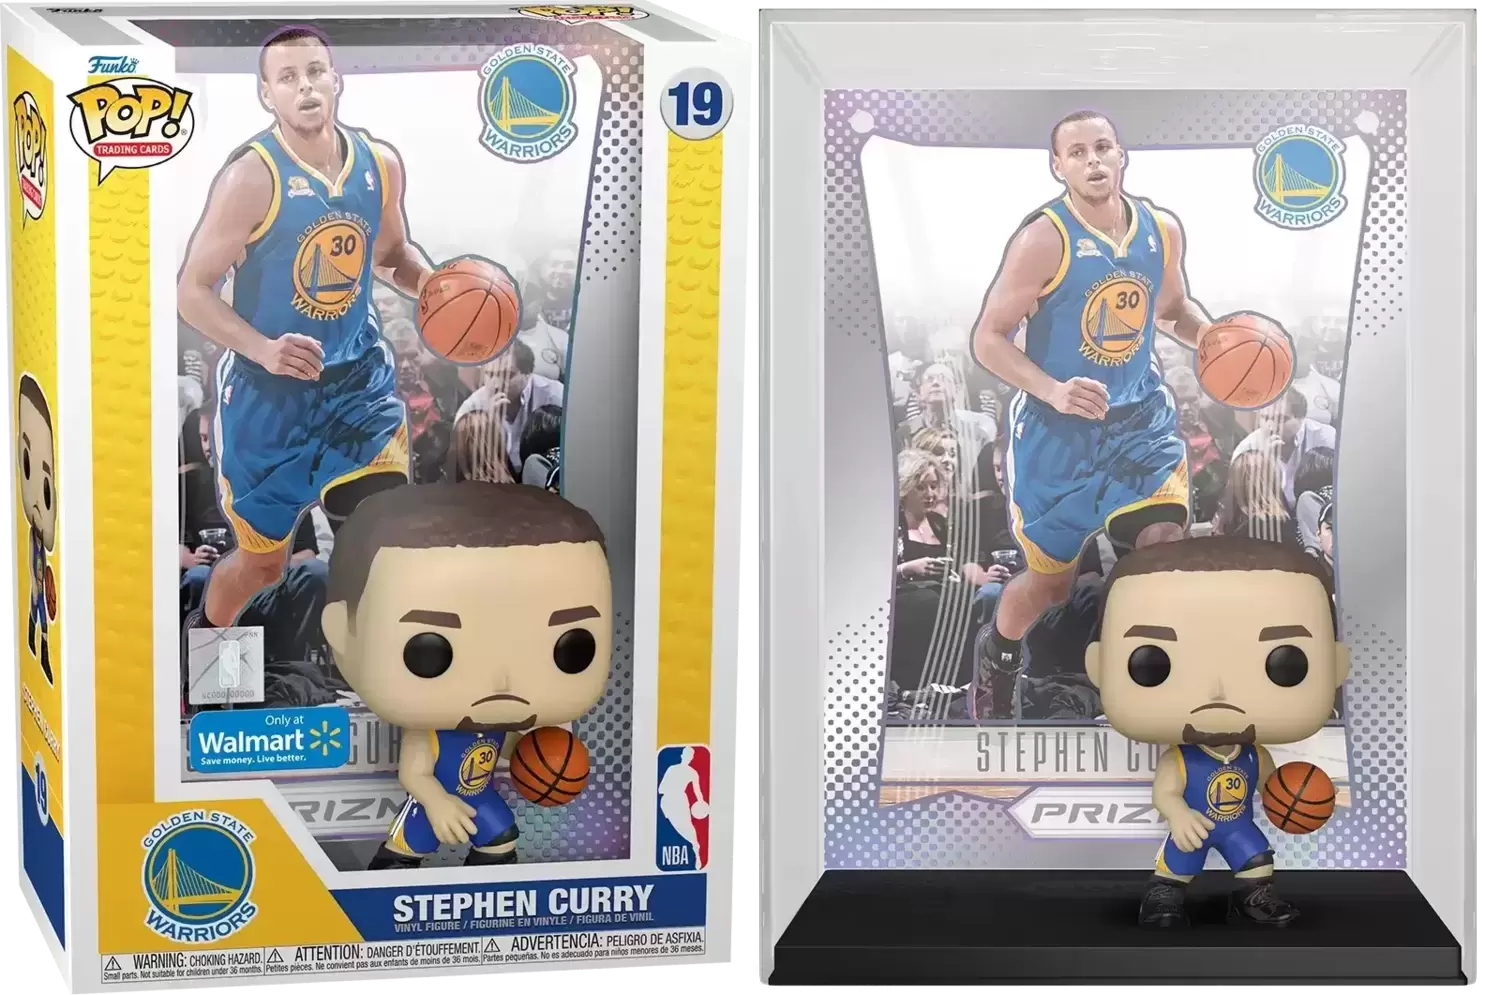 Golden State Warriors - Stephen Curry - POP! Trading Cards action figure 19